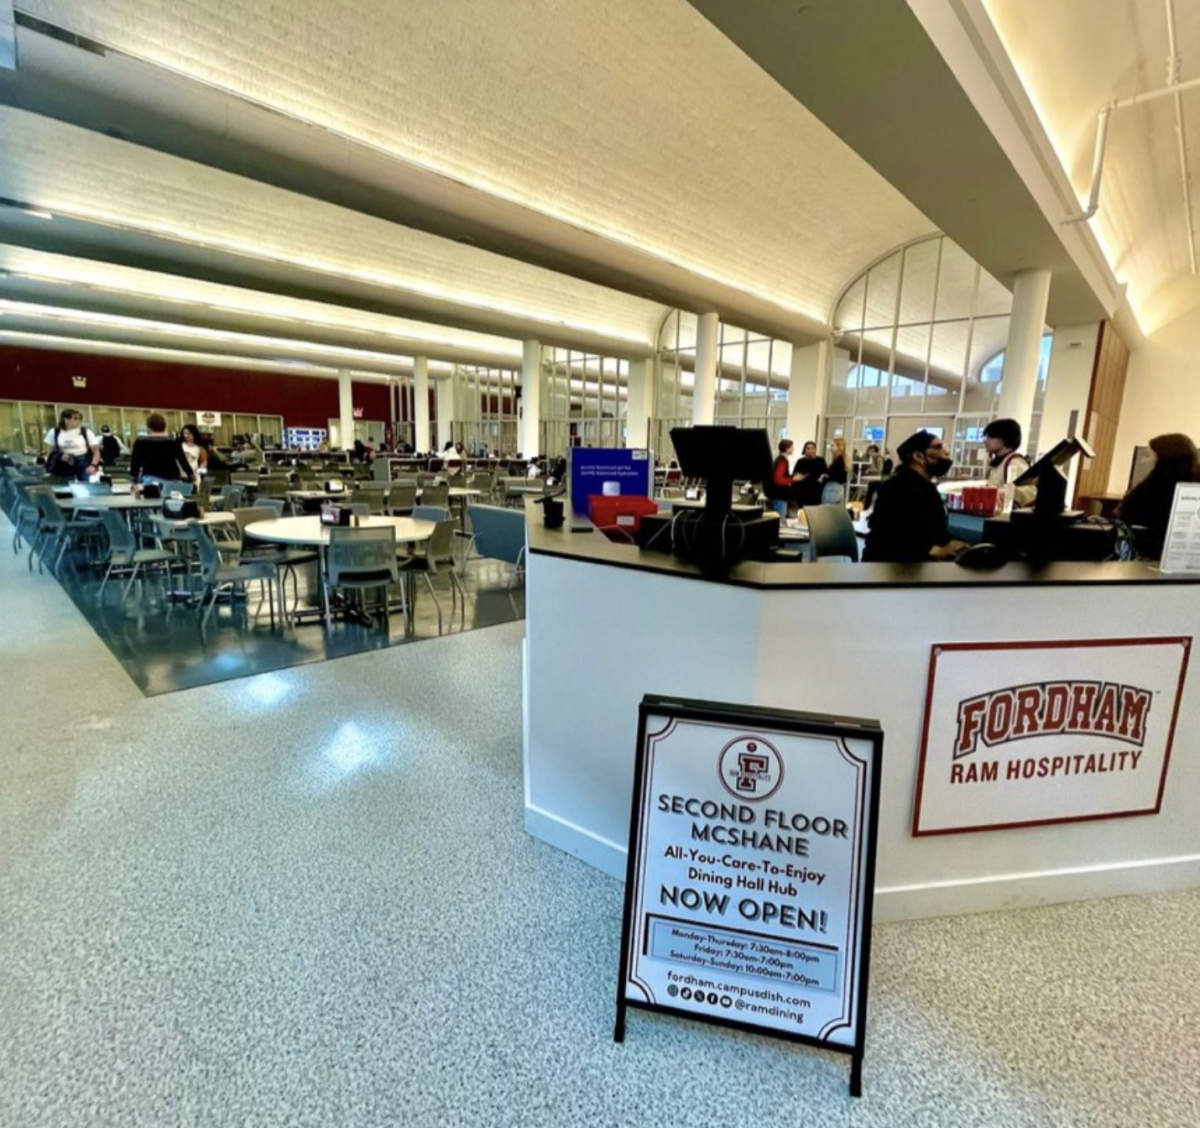 The council welcomed University Dining Contract Liaison, Deming Yaun, to discuss university dining. (Courtesy of Alex Antonov/The Fordham Ram)